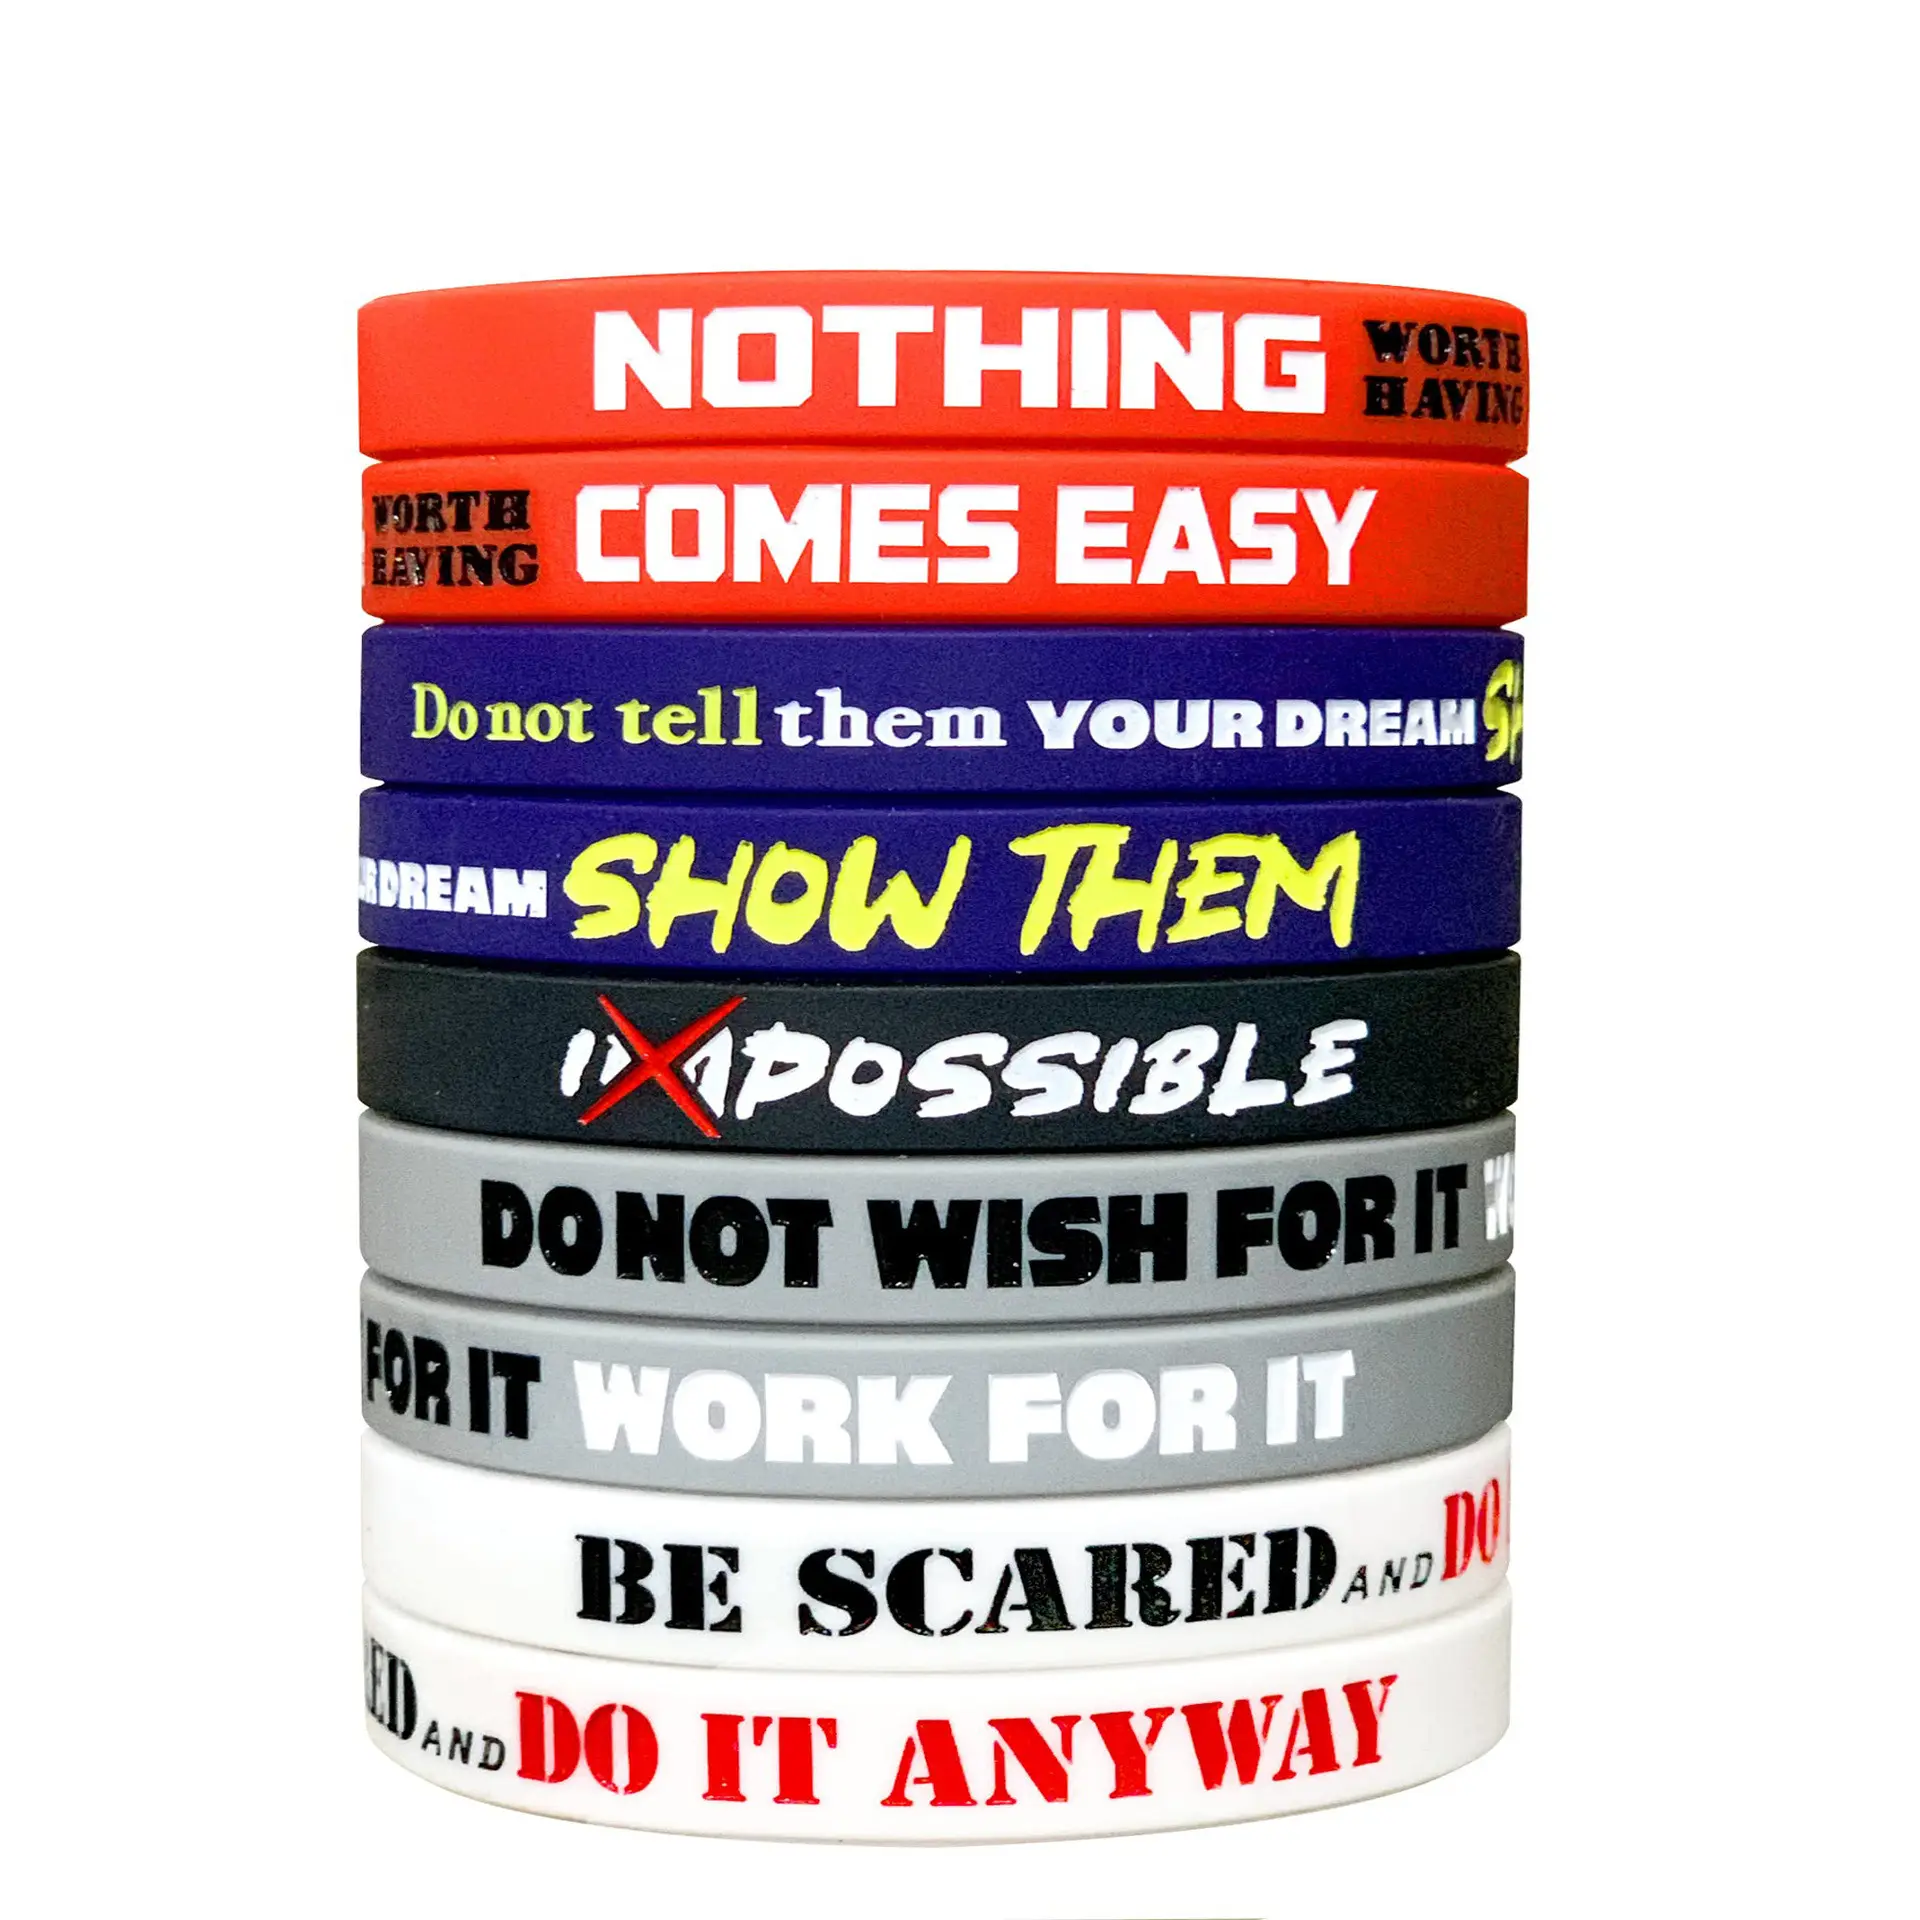 Wowei 2023 Motivational Wristbands Silicone Rubber Bracelets with Inspirational Quotes for Men Women